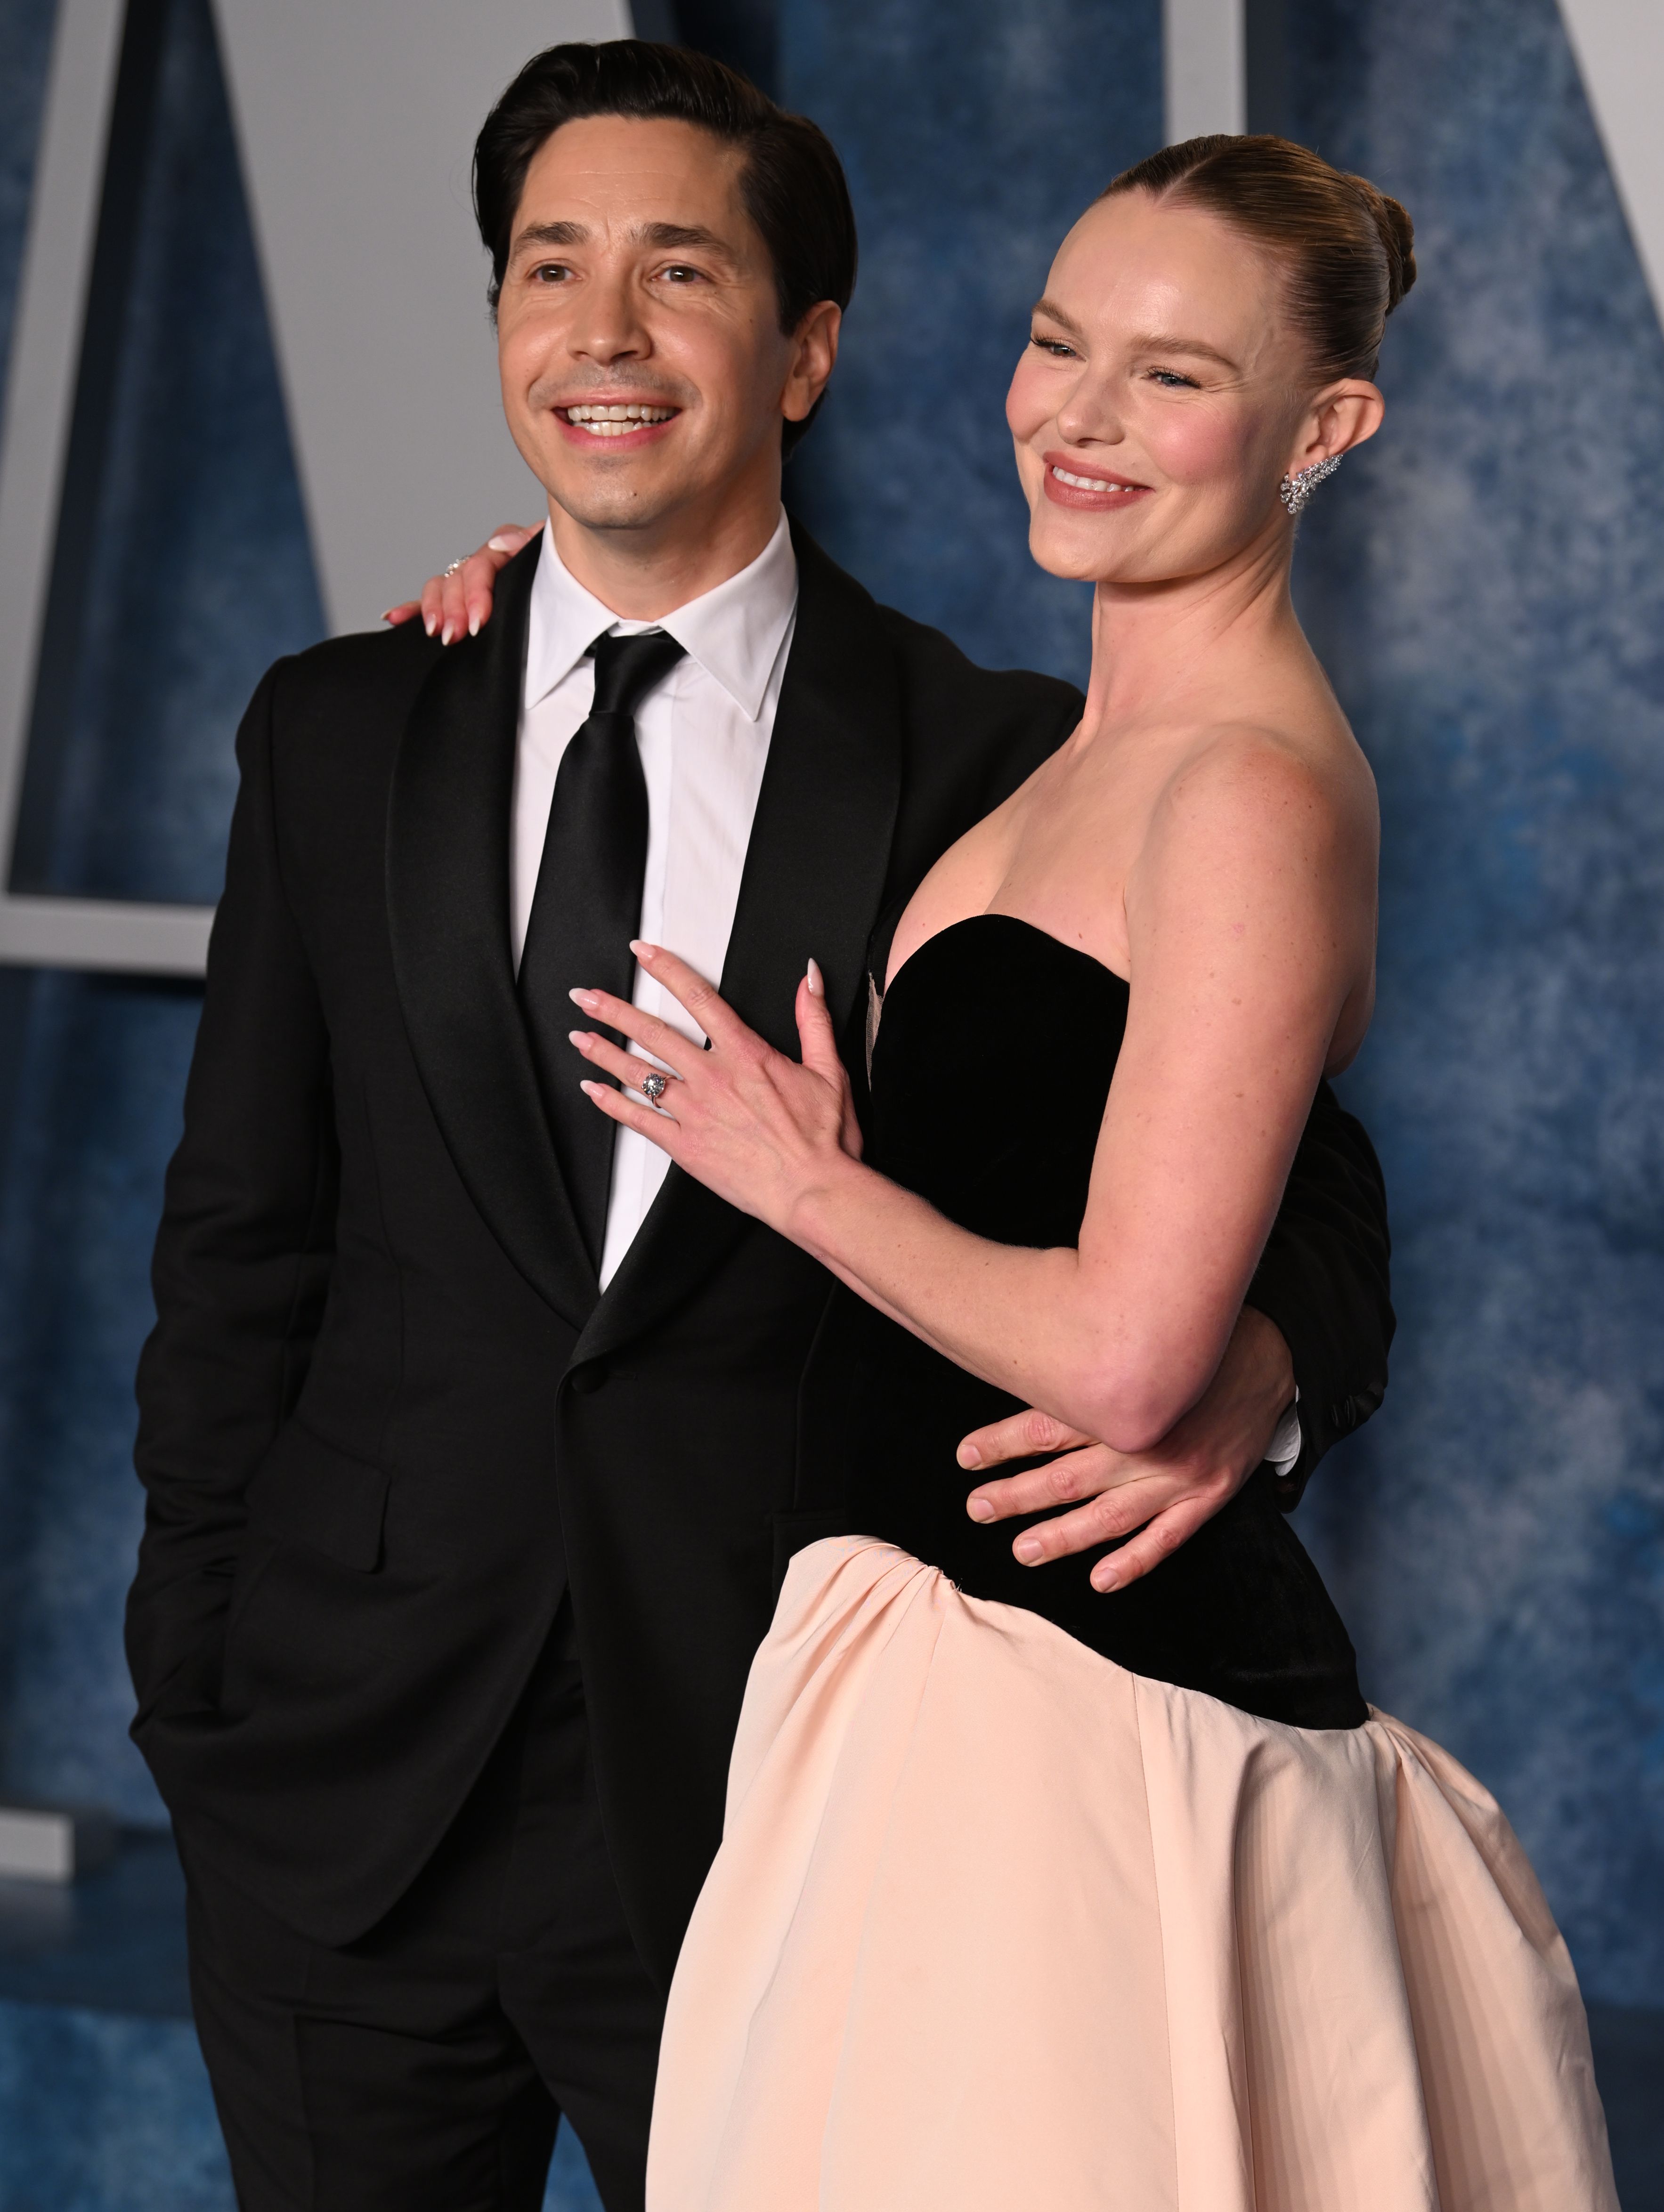 Are Justin Long and Kate Bosworth engaged?